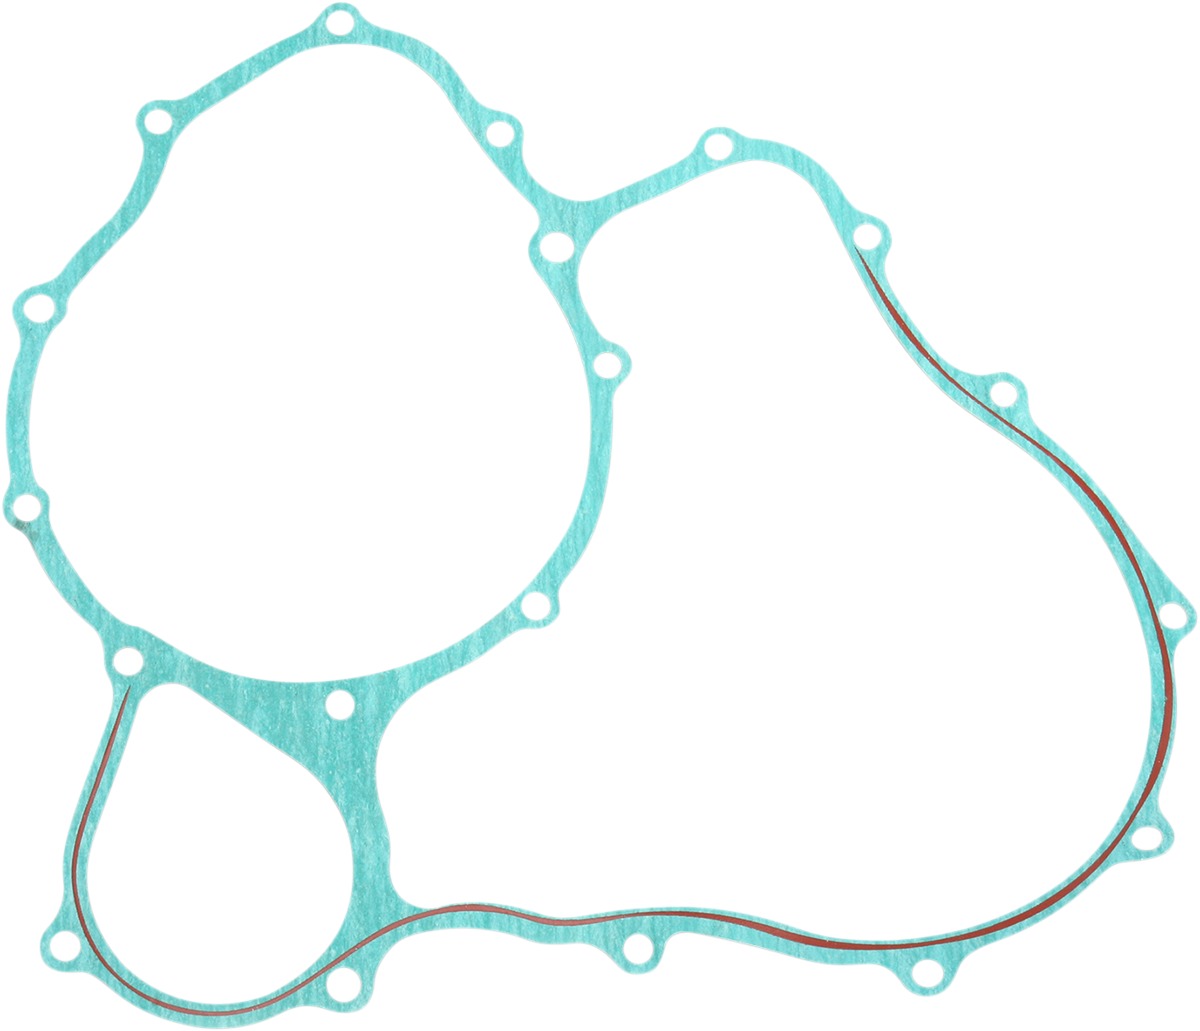 Stator Cover Gasket - For 86-87 Honda GL1200i/GL1200A GoldWing - Click Image to Close